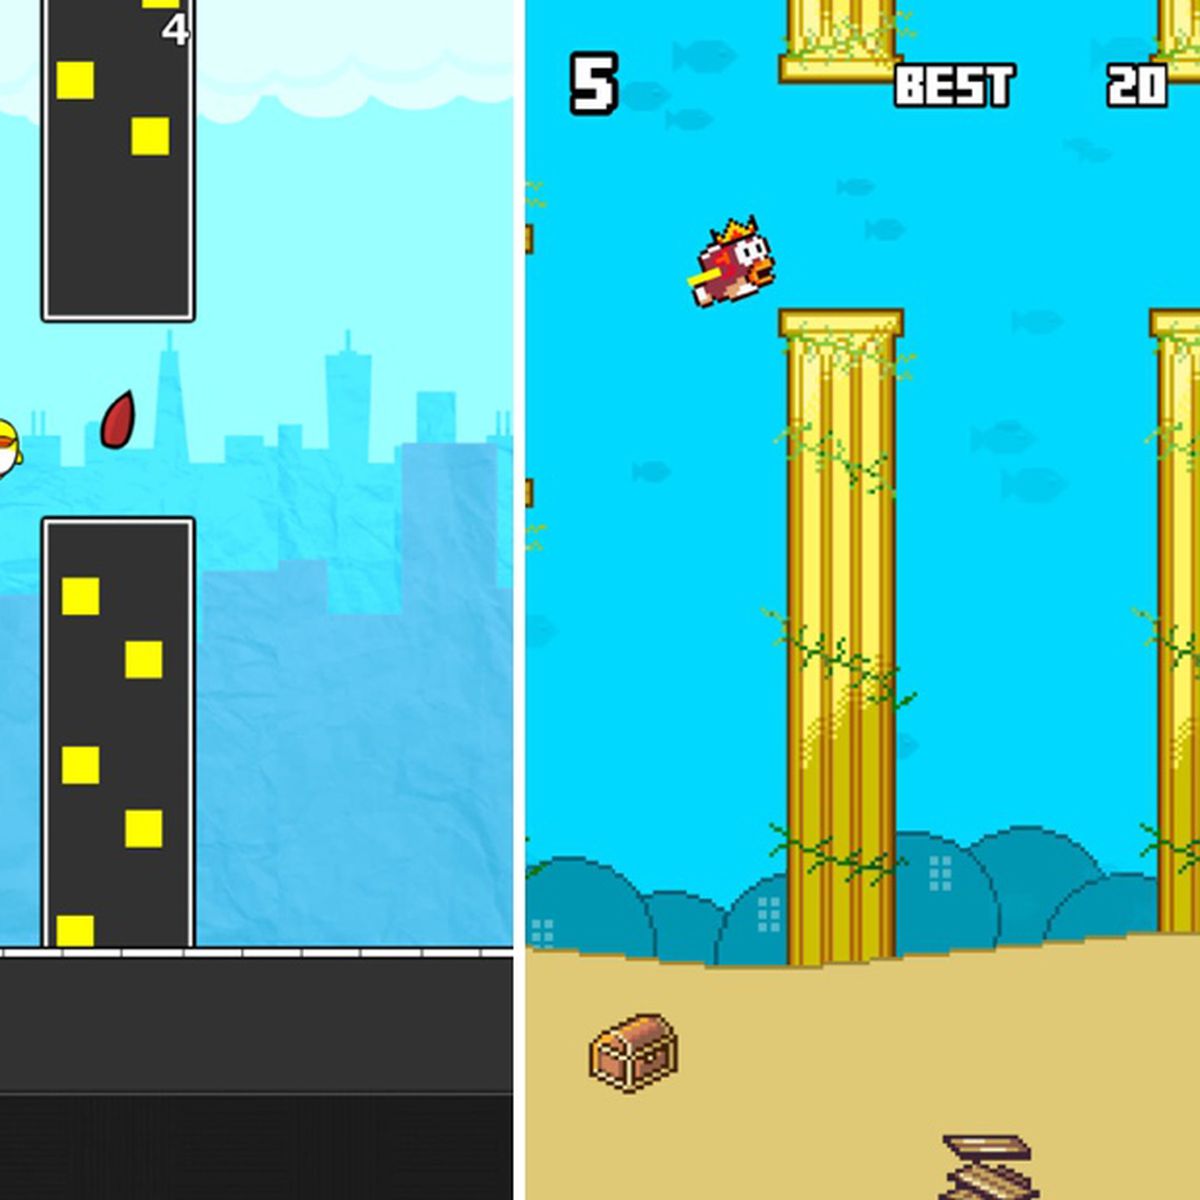 3 Apps that are Worse than Flappy Bird